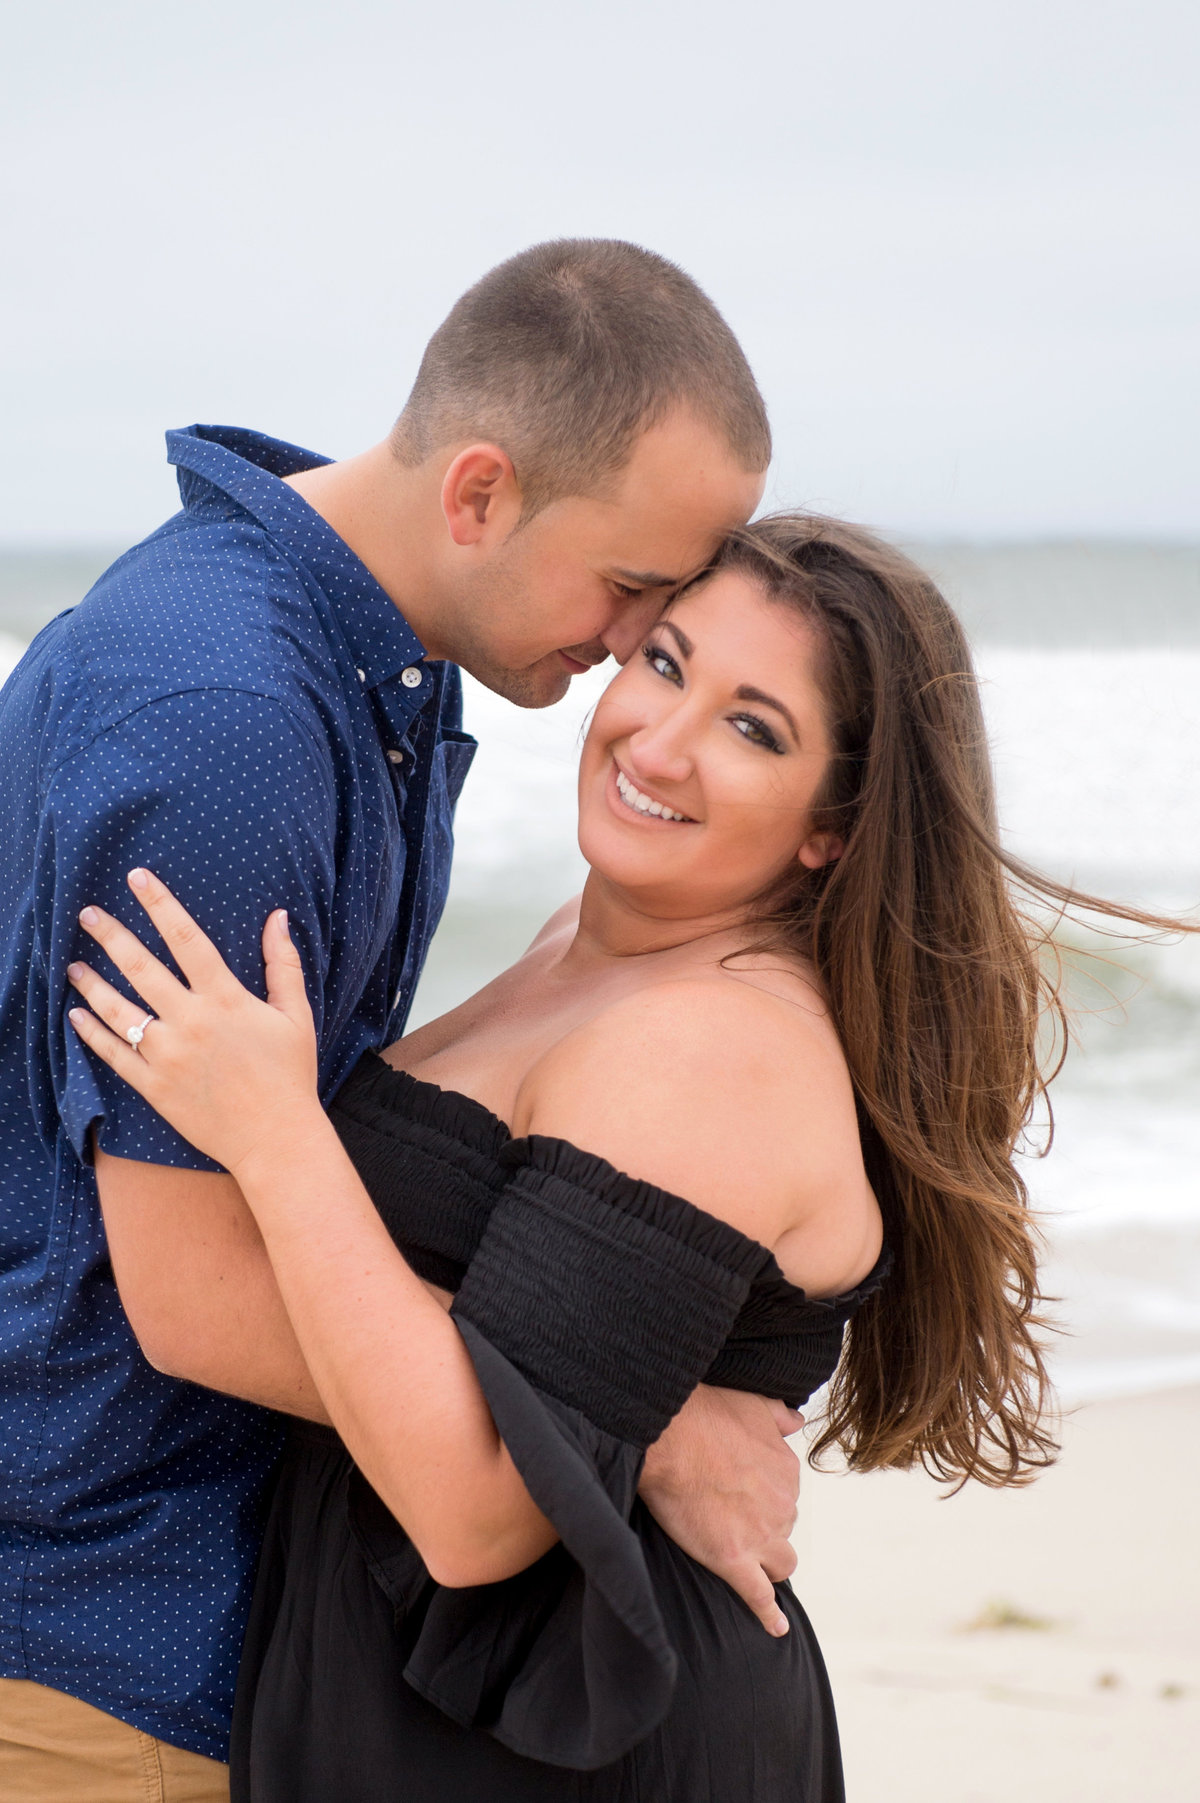 lavallette-beach-surprise-proposal-imagery-by-marianne-52